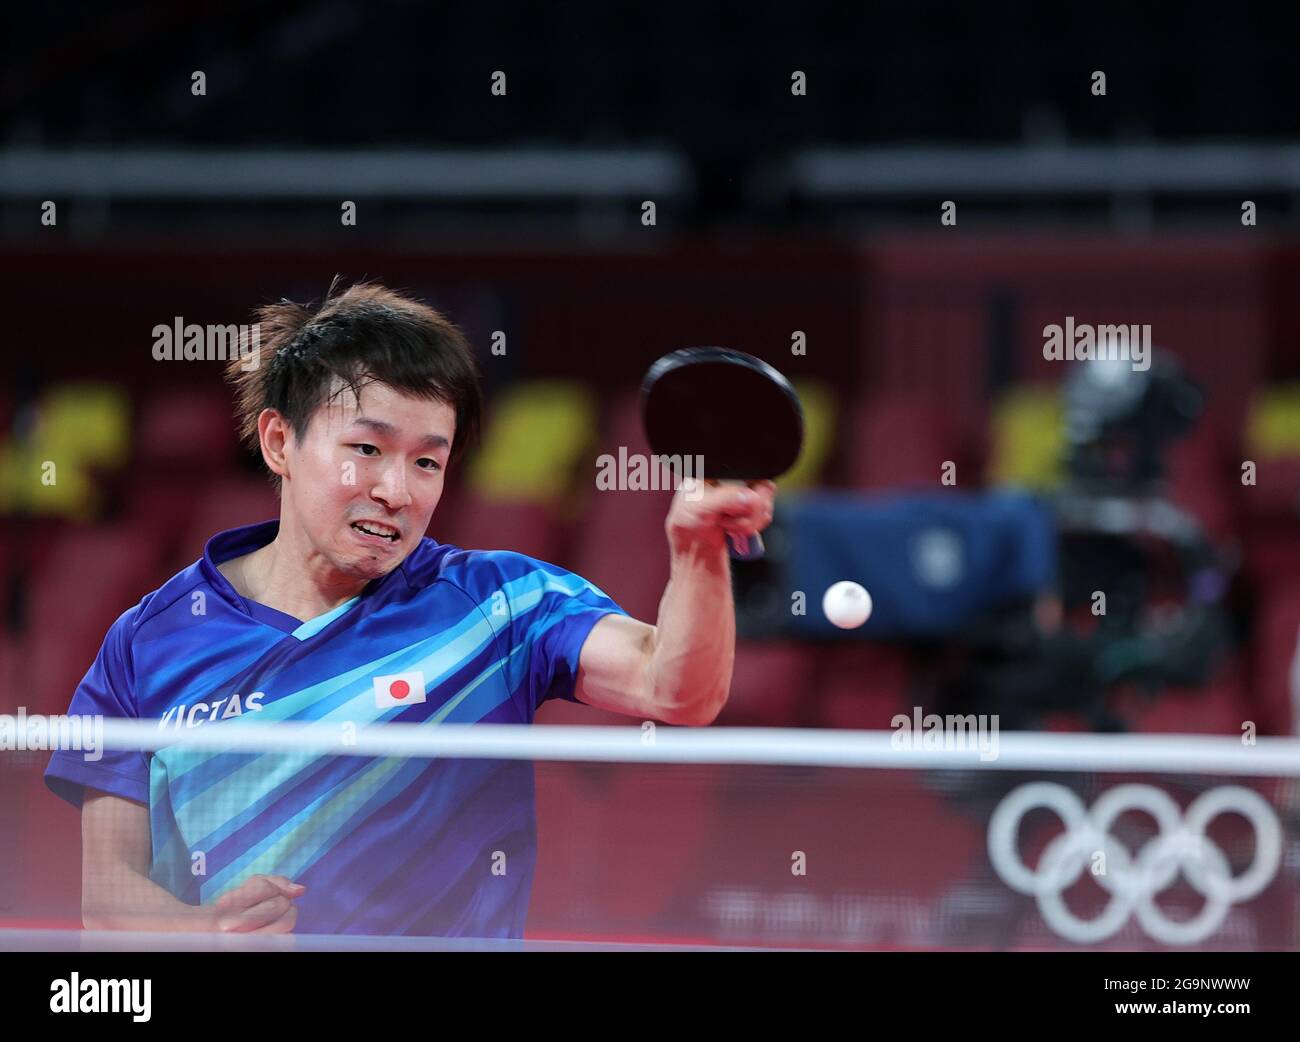 Tokyo, Japan. 27th July, 2021. Koki Niwa of Japan competes during the table tennis men's singles round of 16 match against Dimitrij Ovtcharov of Germany at the Tokyo 2020 Olympic Games in Tokyo, Japan, July 27, 2021. Credit: Wang Dongzhen/Xinhua/Alamy Live News Stock Photo